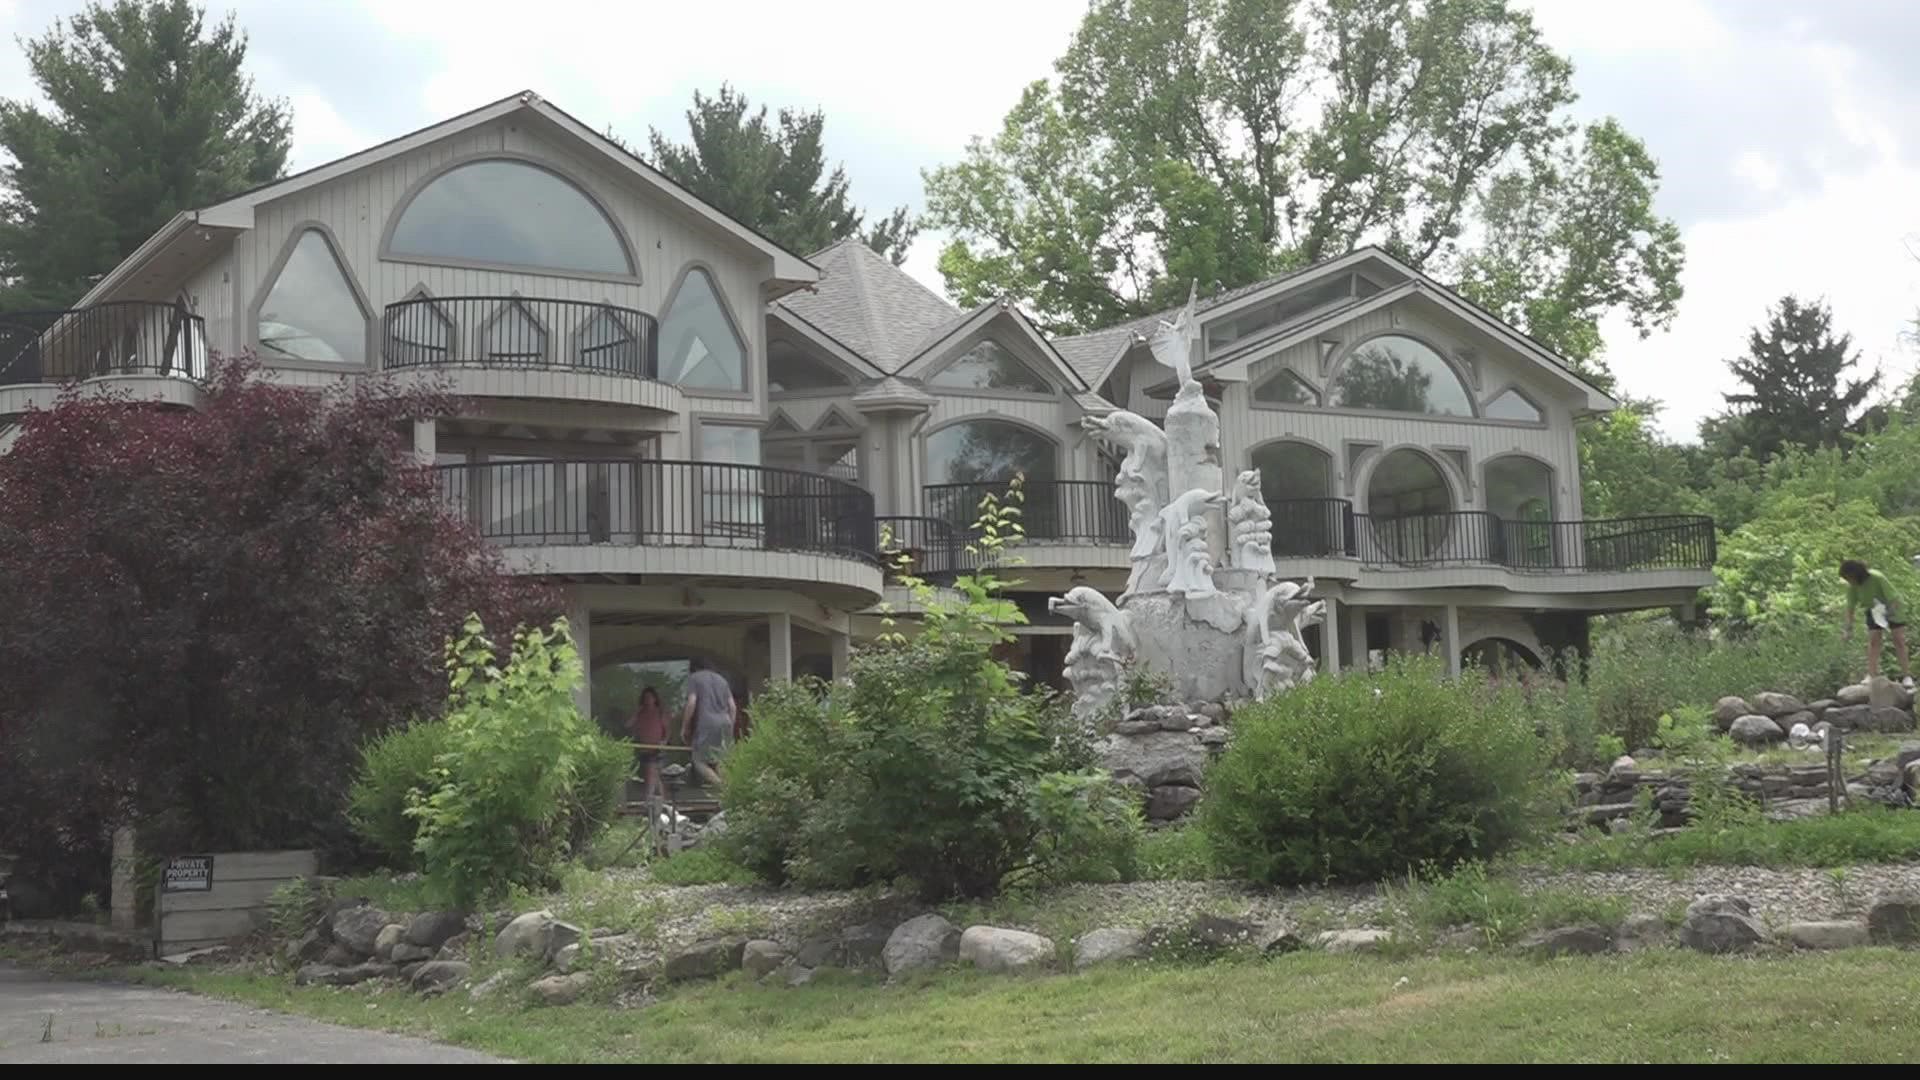 You can get a look inside the Dolphin Mansion throughout this weekend.